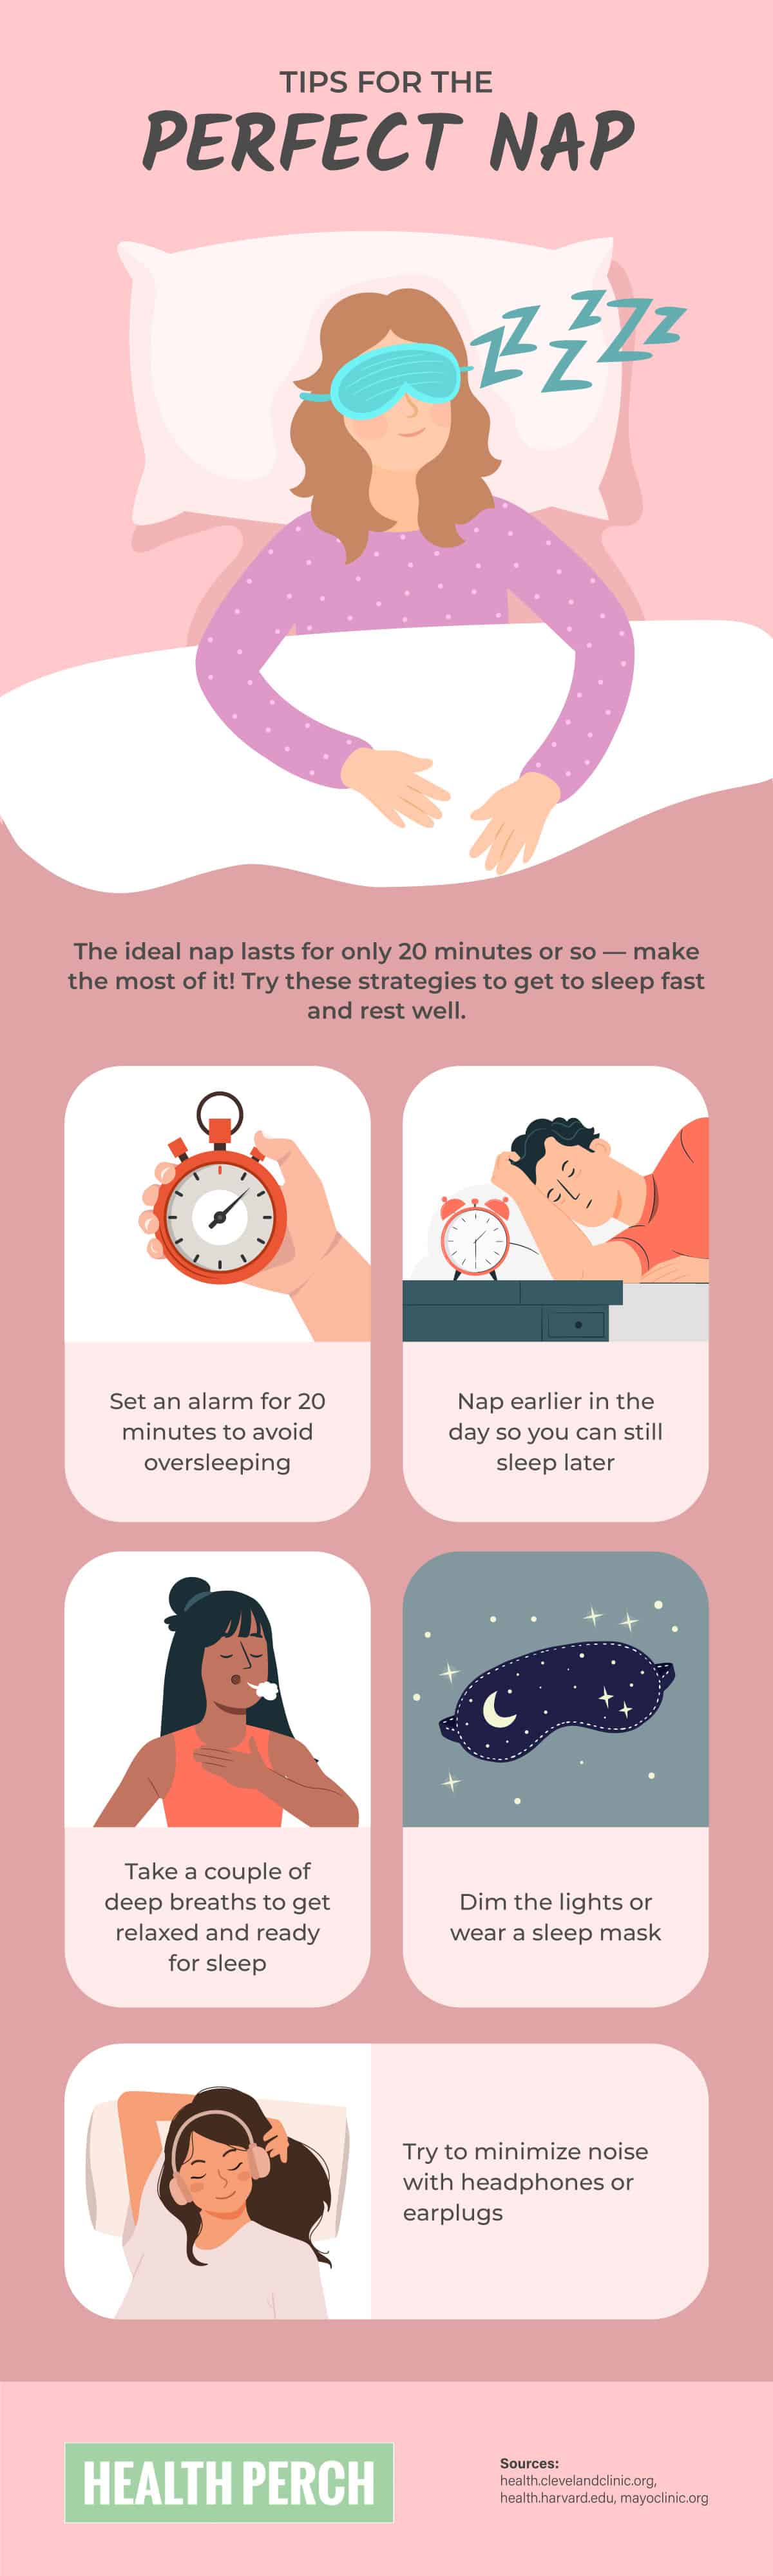 The Benefits of a Good Nap